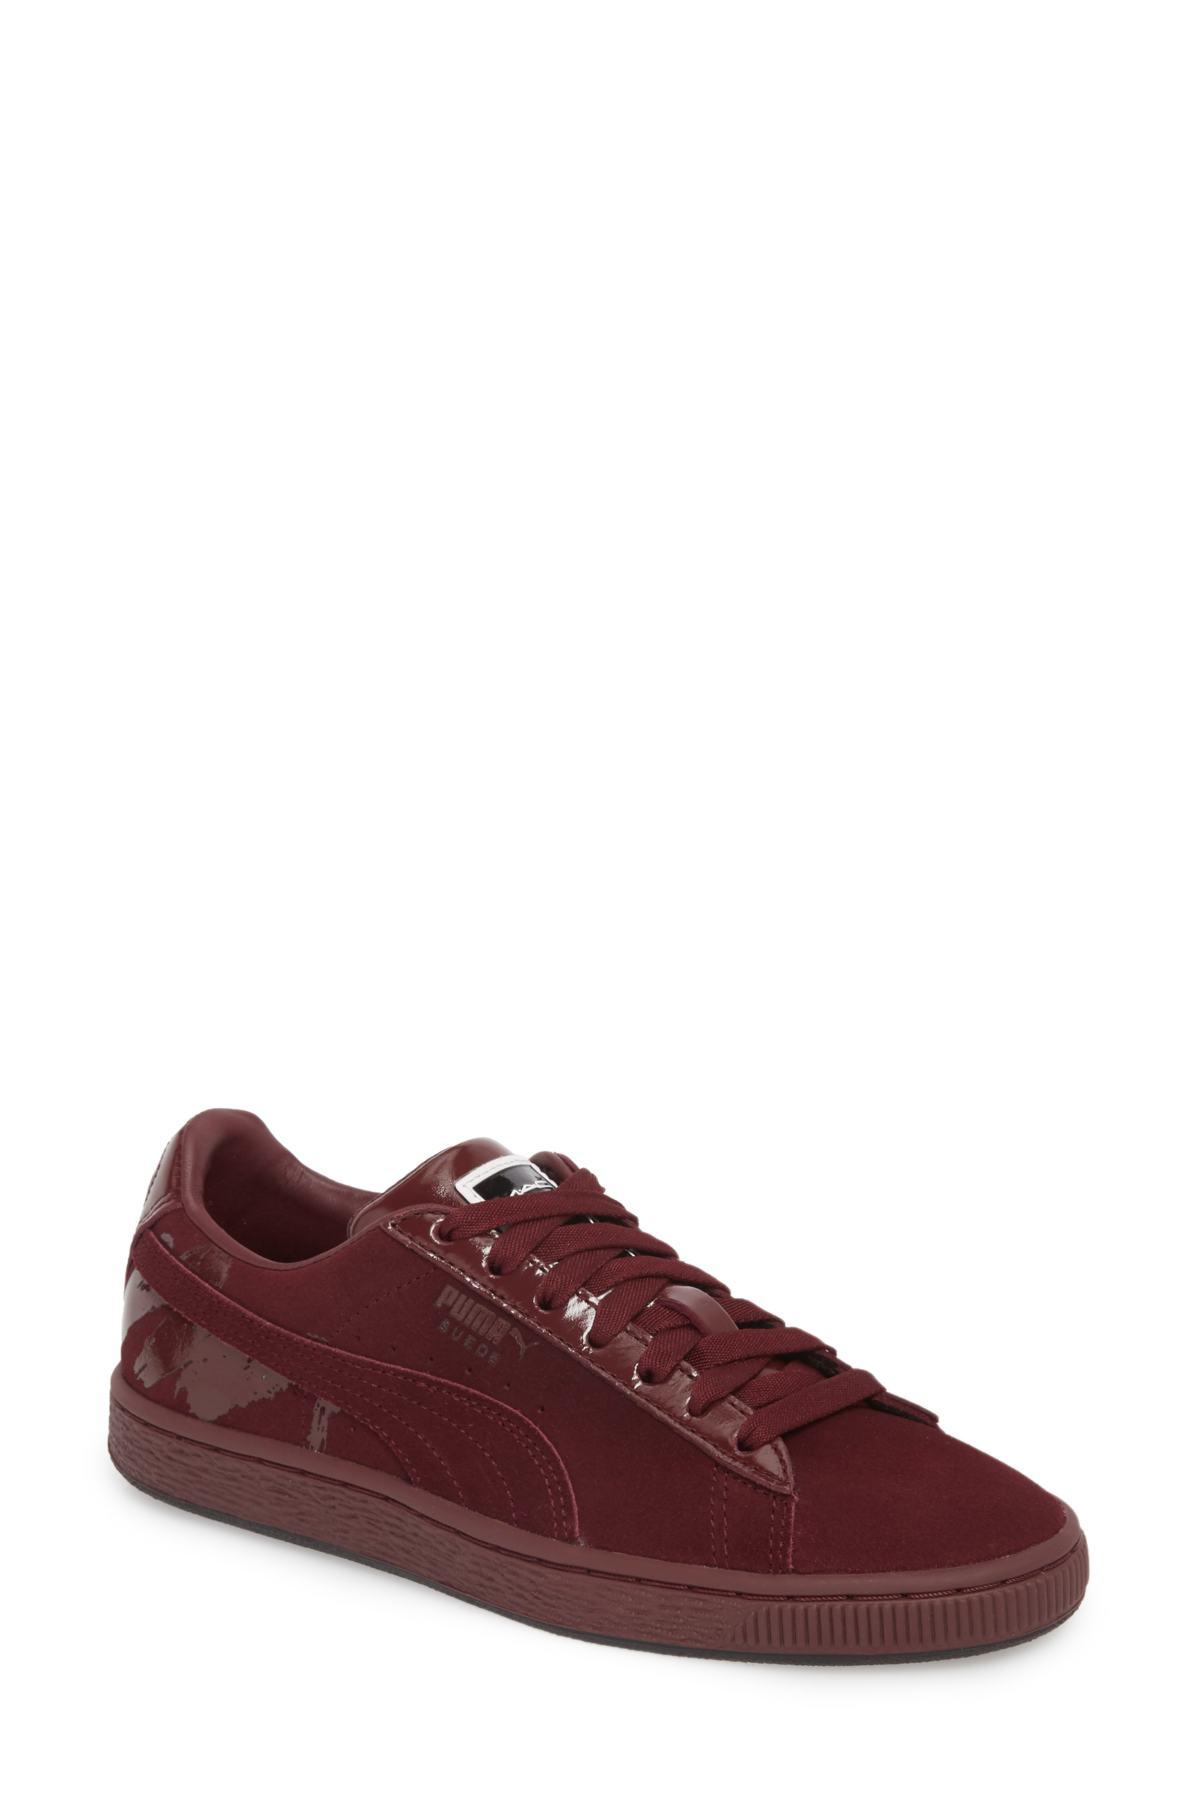 PUMA Mac Three Sin Suede Classic Casual Athletic & Sneakers - Lyst